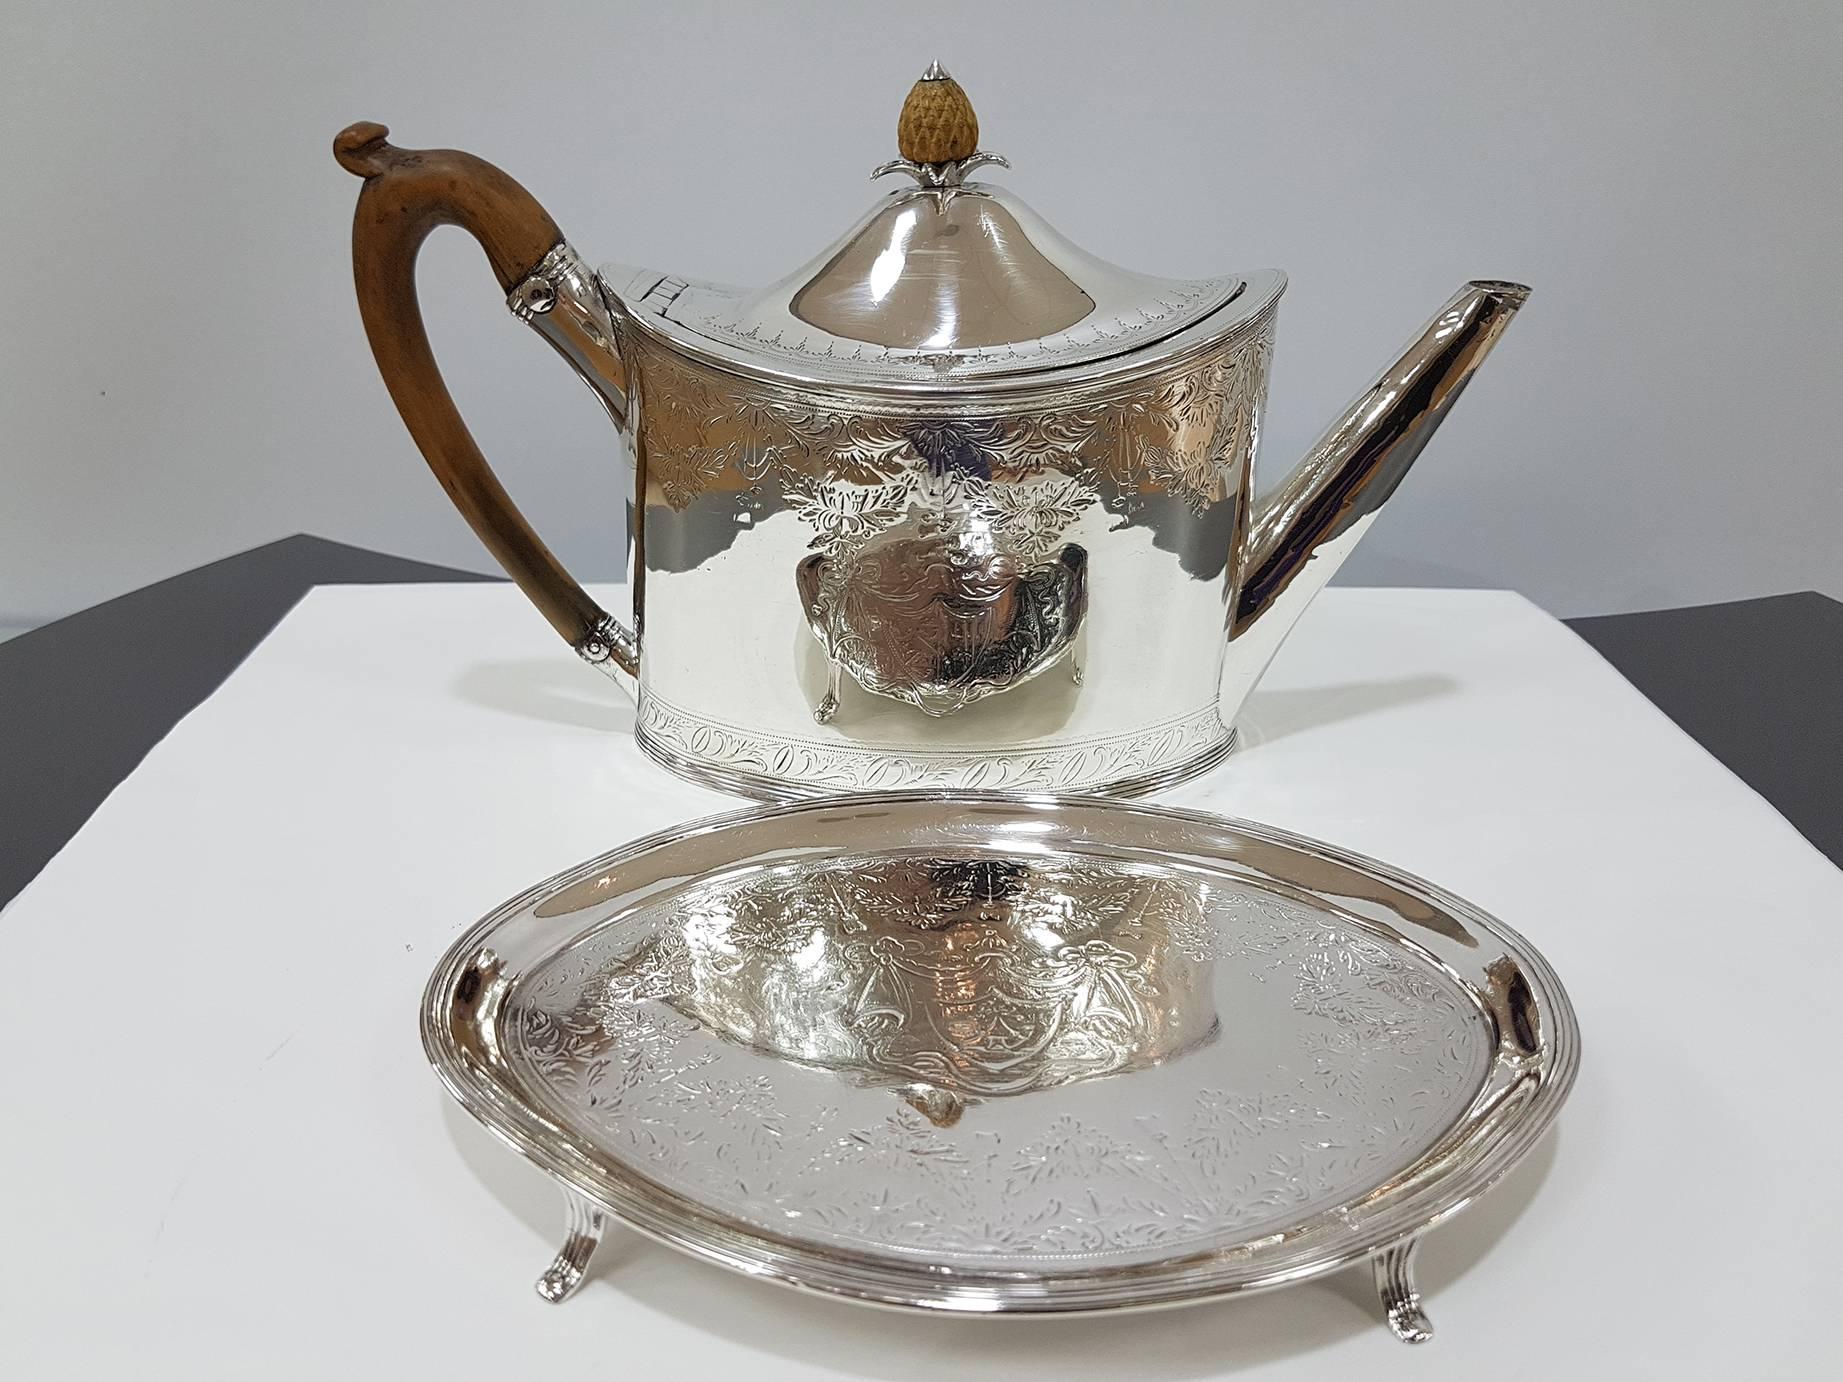 Late 18th Century 18th Century Sterling Silver Oval Engraved Teapot on Stand by Peter Ann Bateman